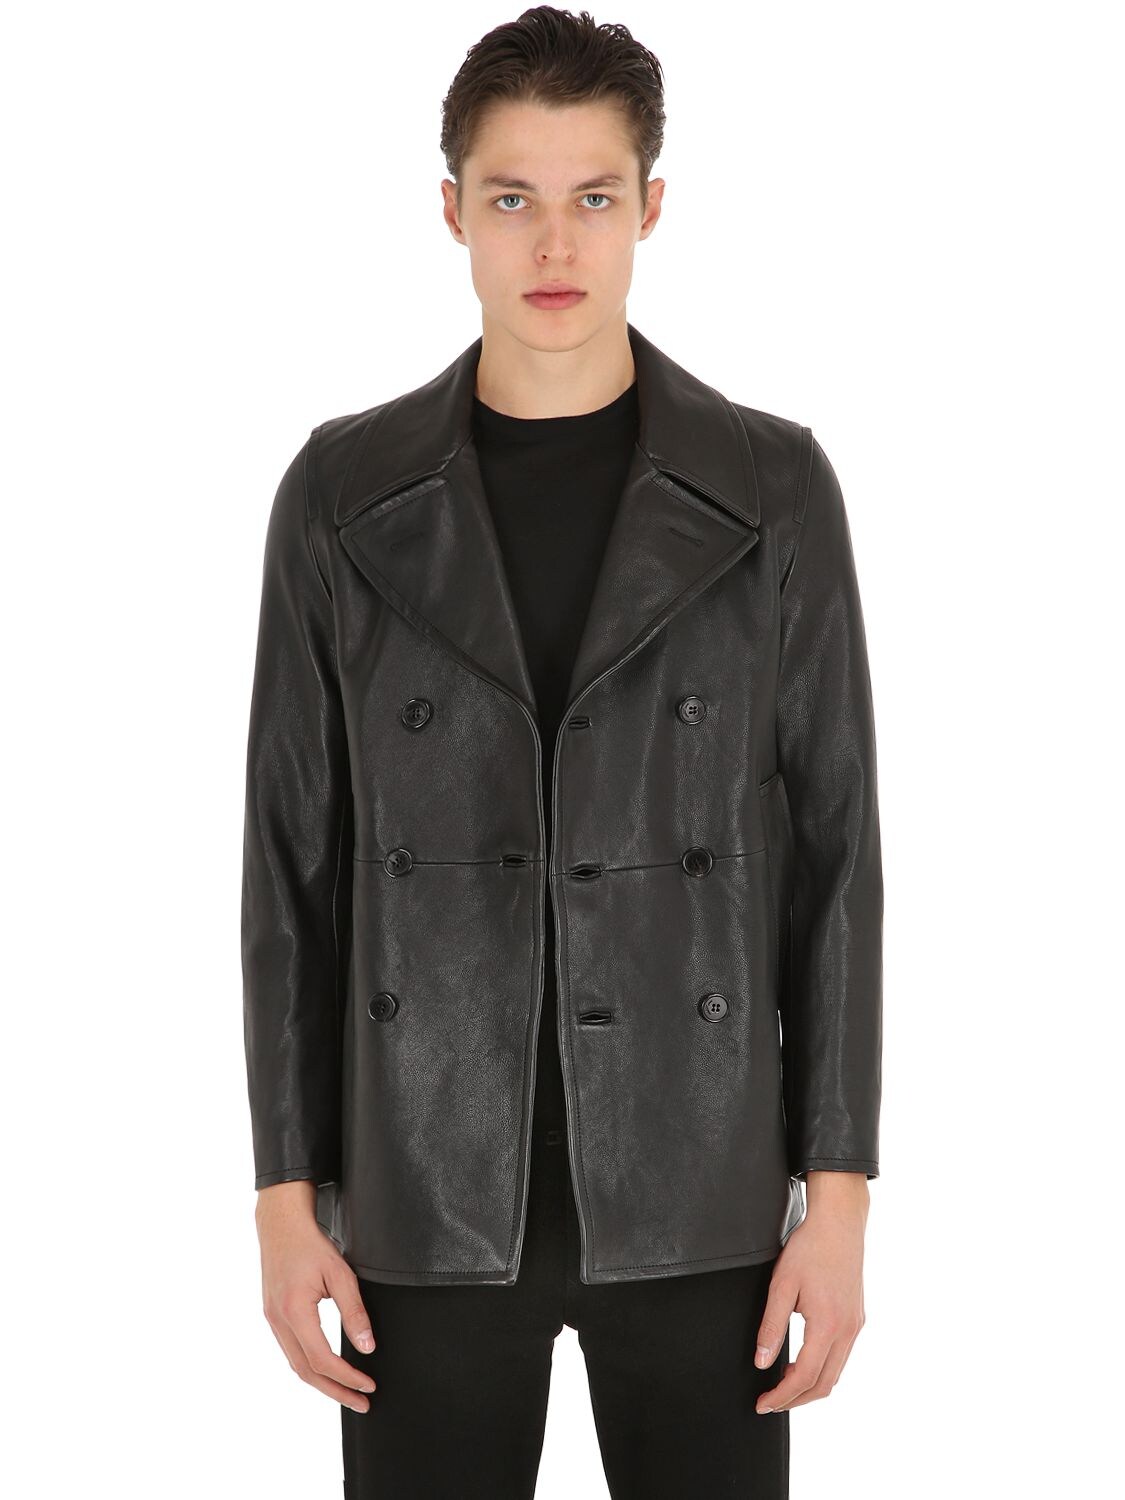 SAINT LAURENT DOUBLE BREASTED LEATHER PEACOAT,68IRKP002-MTAwMA2